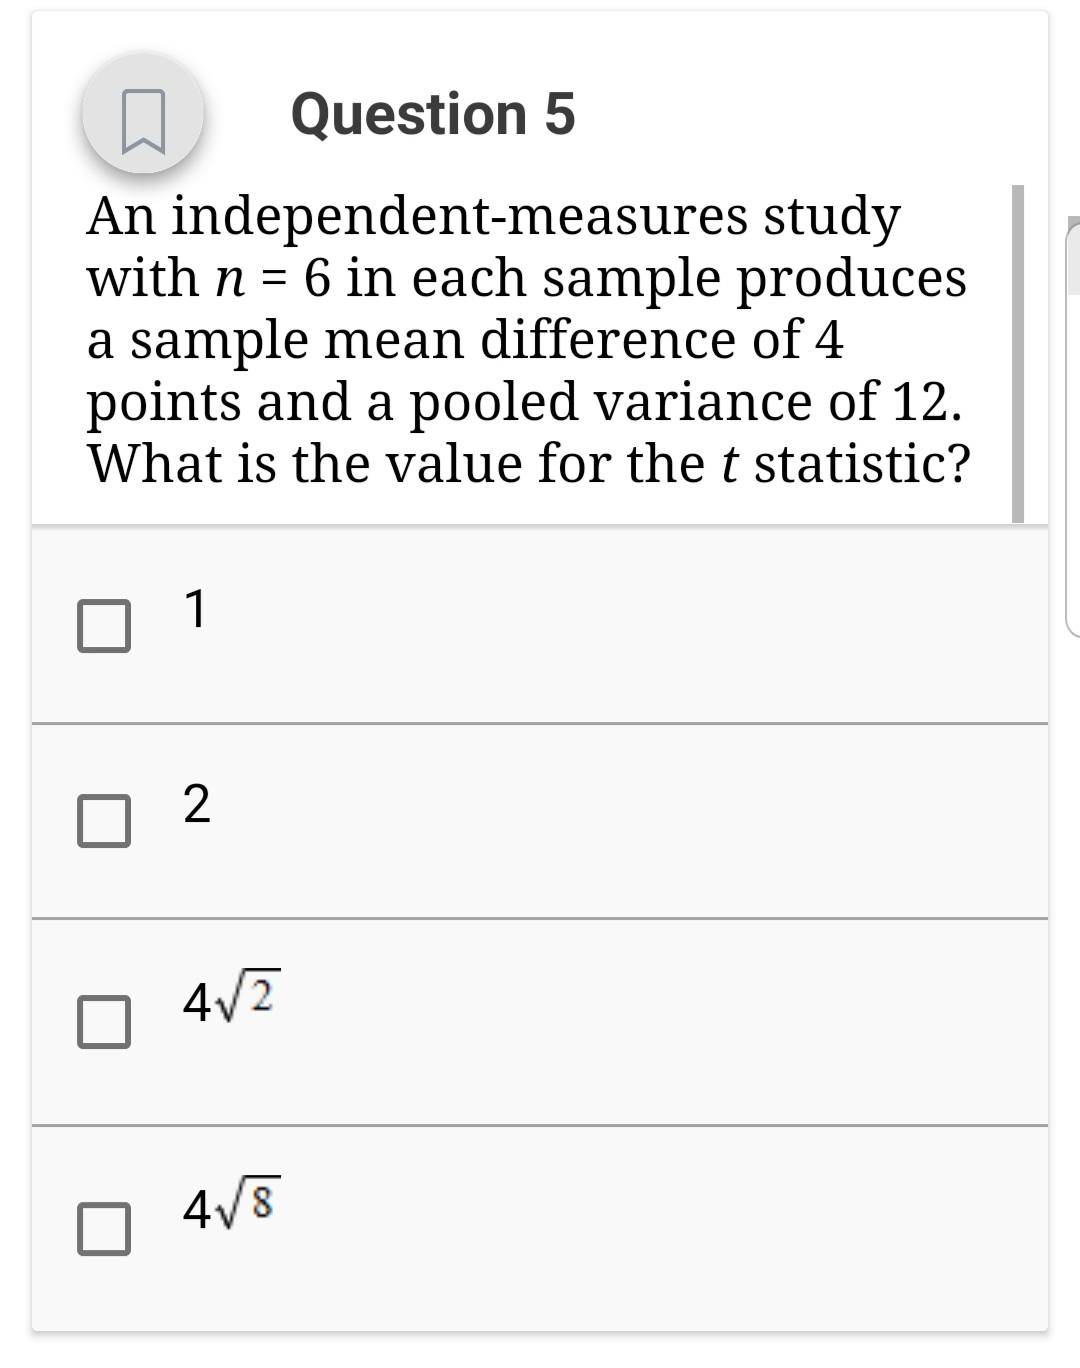 Question 5
An independent-measures study
with n = 6 in each sample produces
a sample mean difference of4
points and a pooled variance of 12.
What is the value for the t statistic?
2
4
